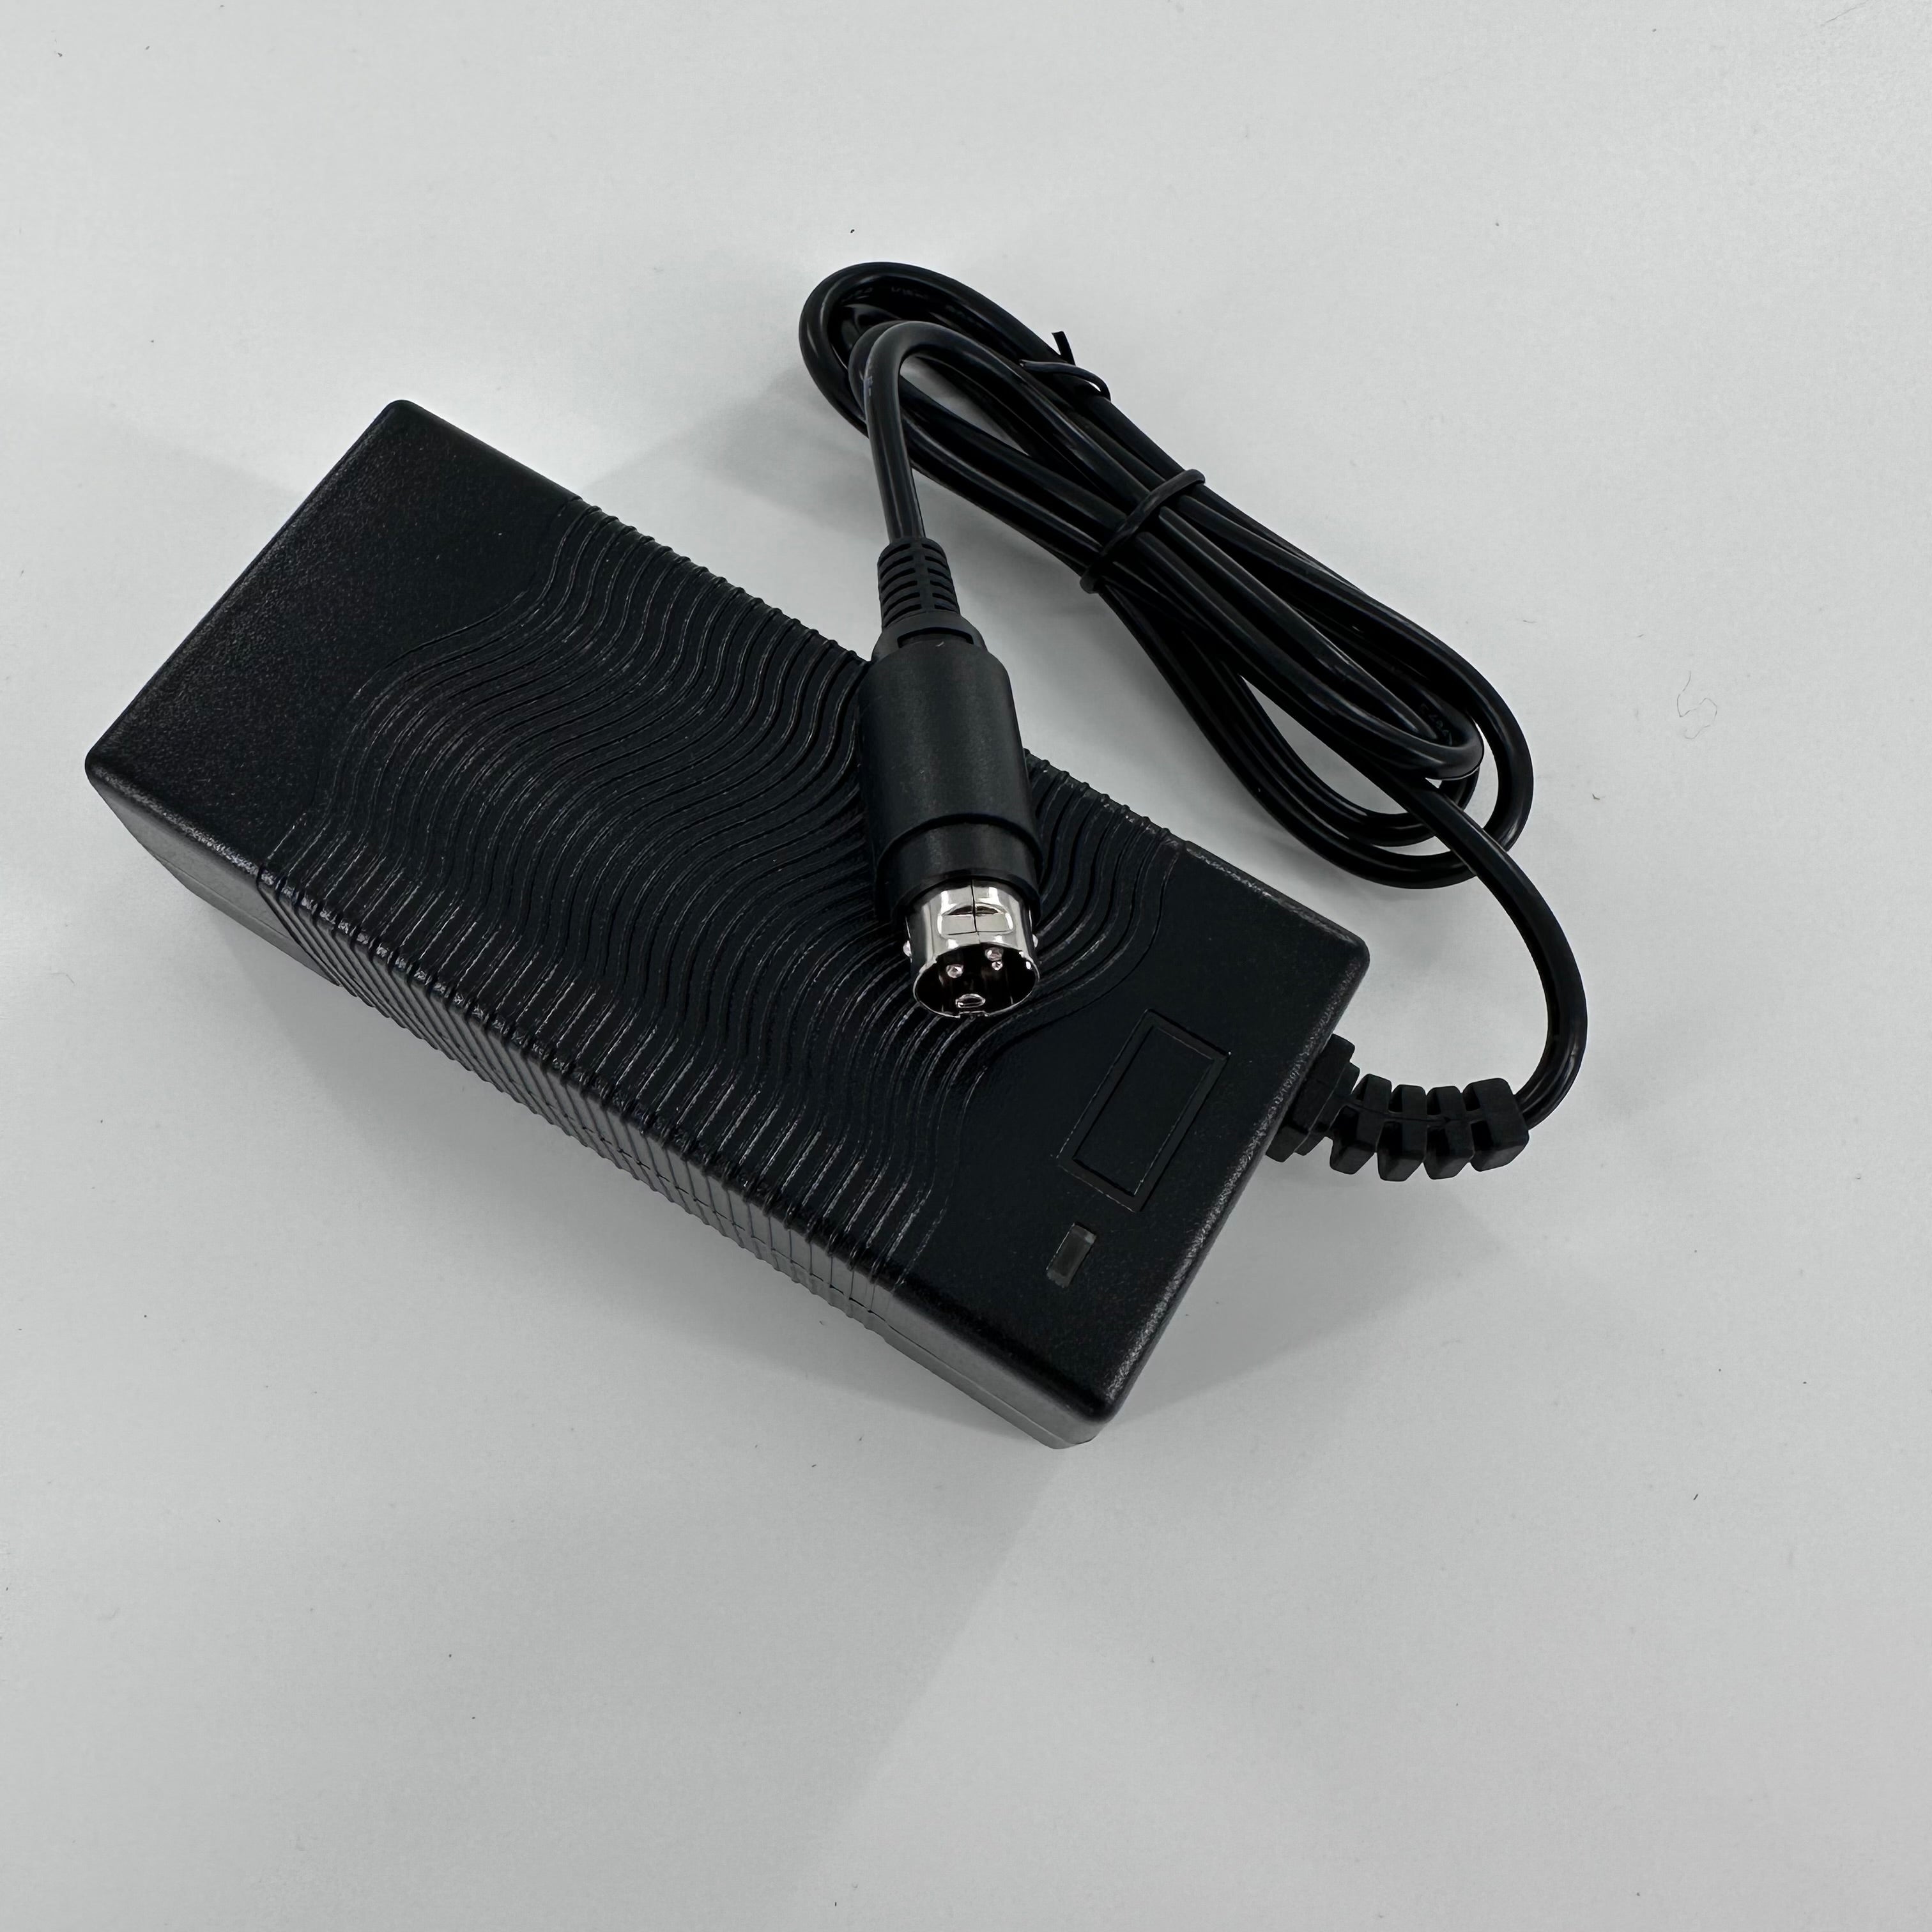 2 Amp 3 Pin Charger